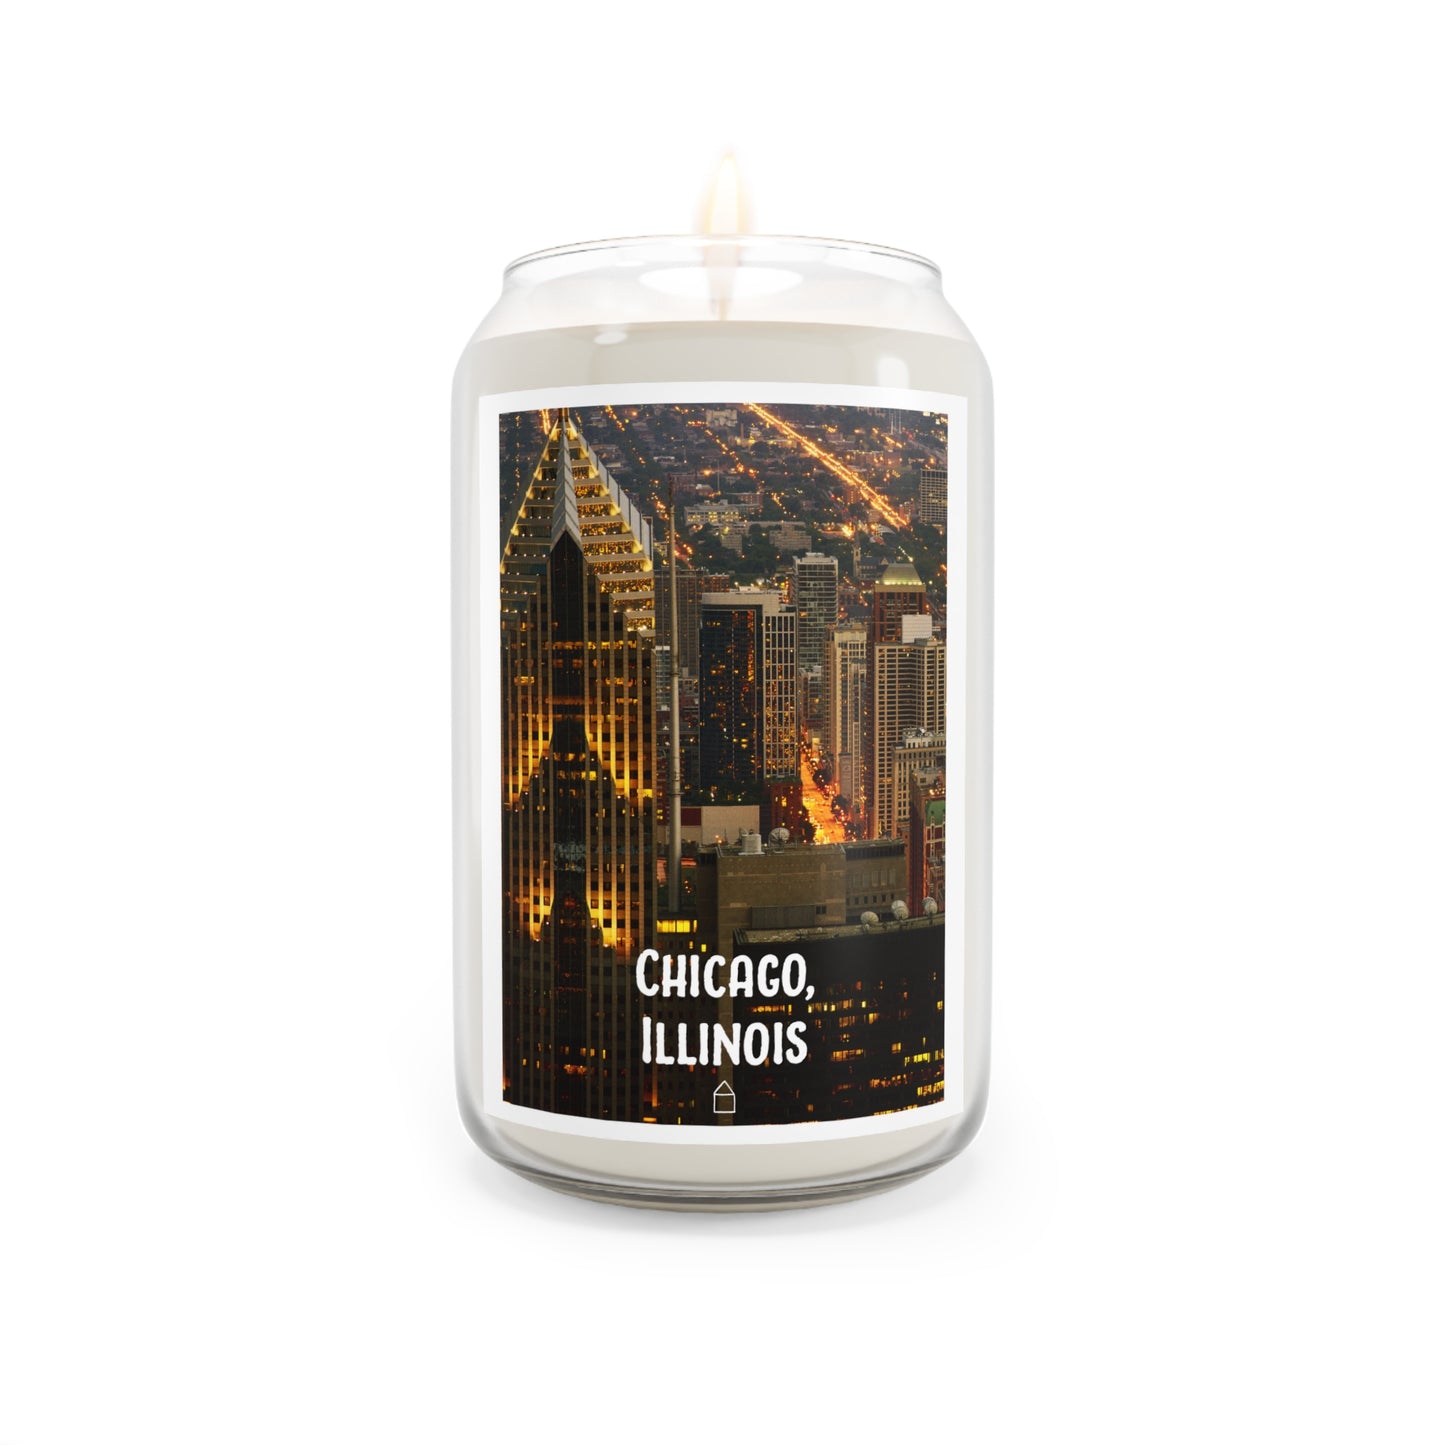 Chicago, Illinois (#031) - Home Town Candles, 13.75oz